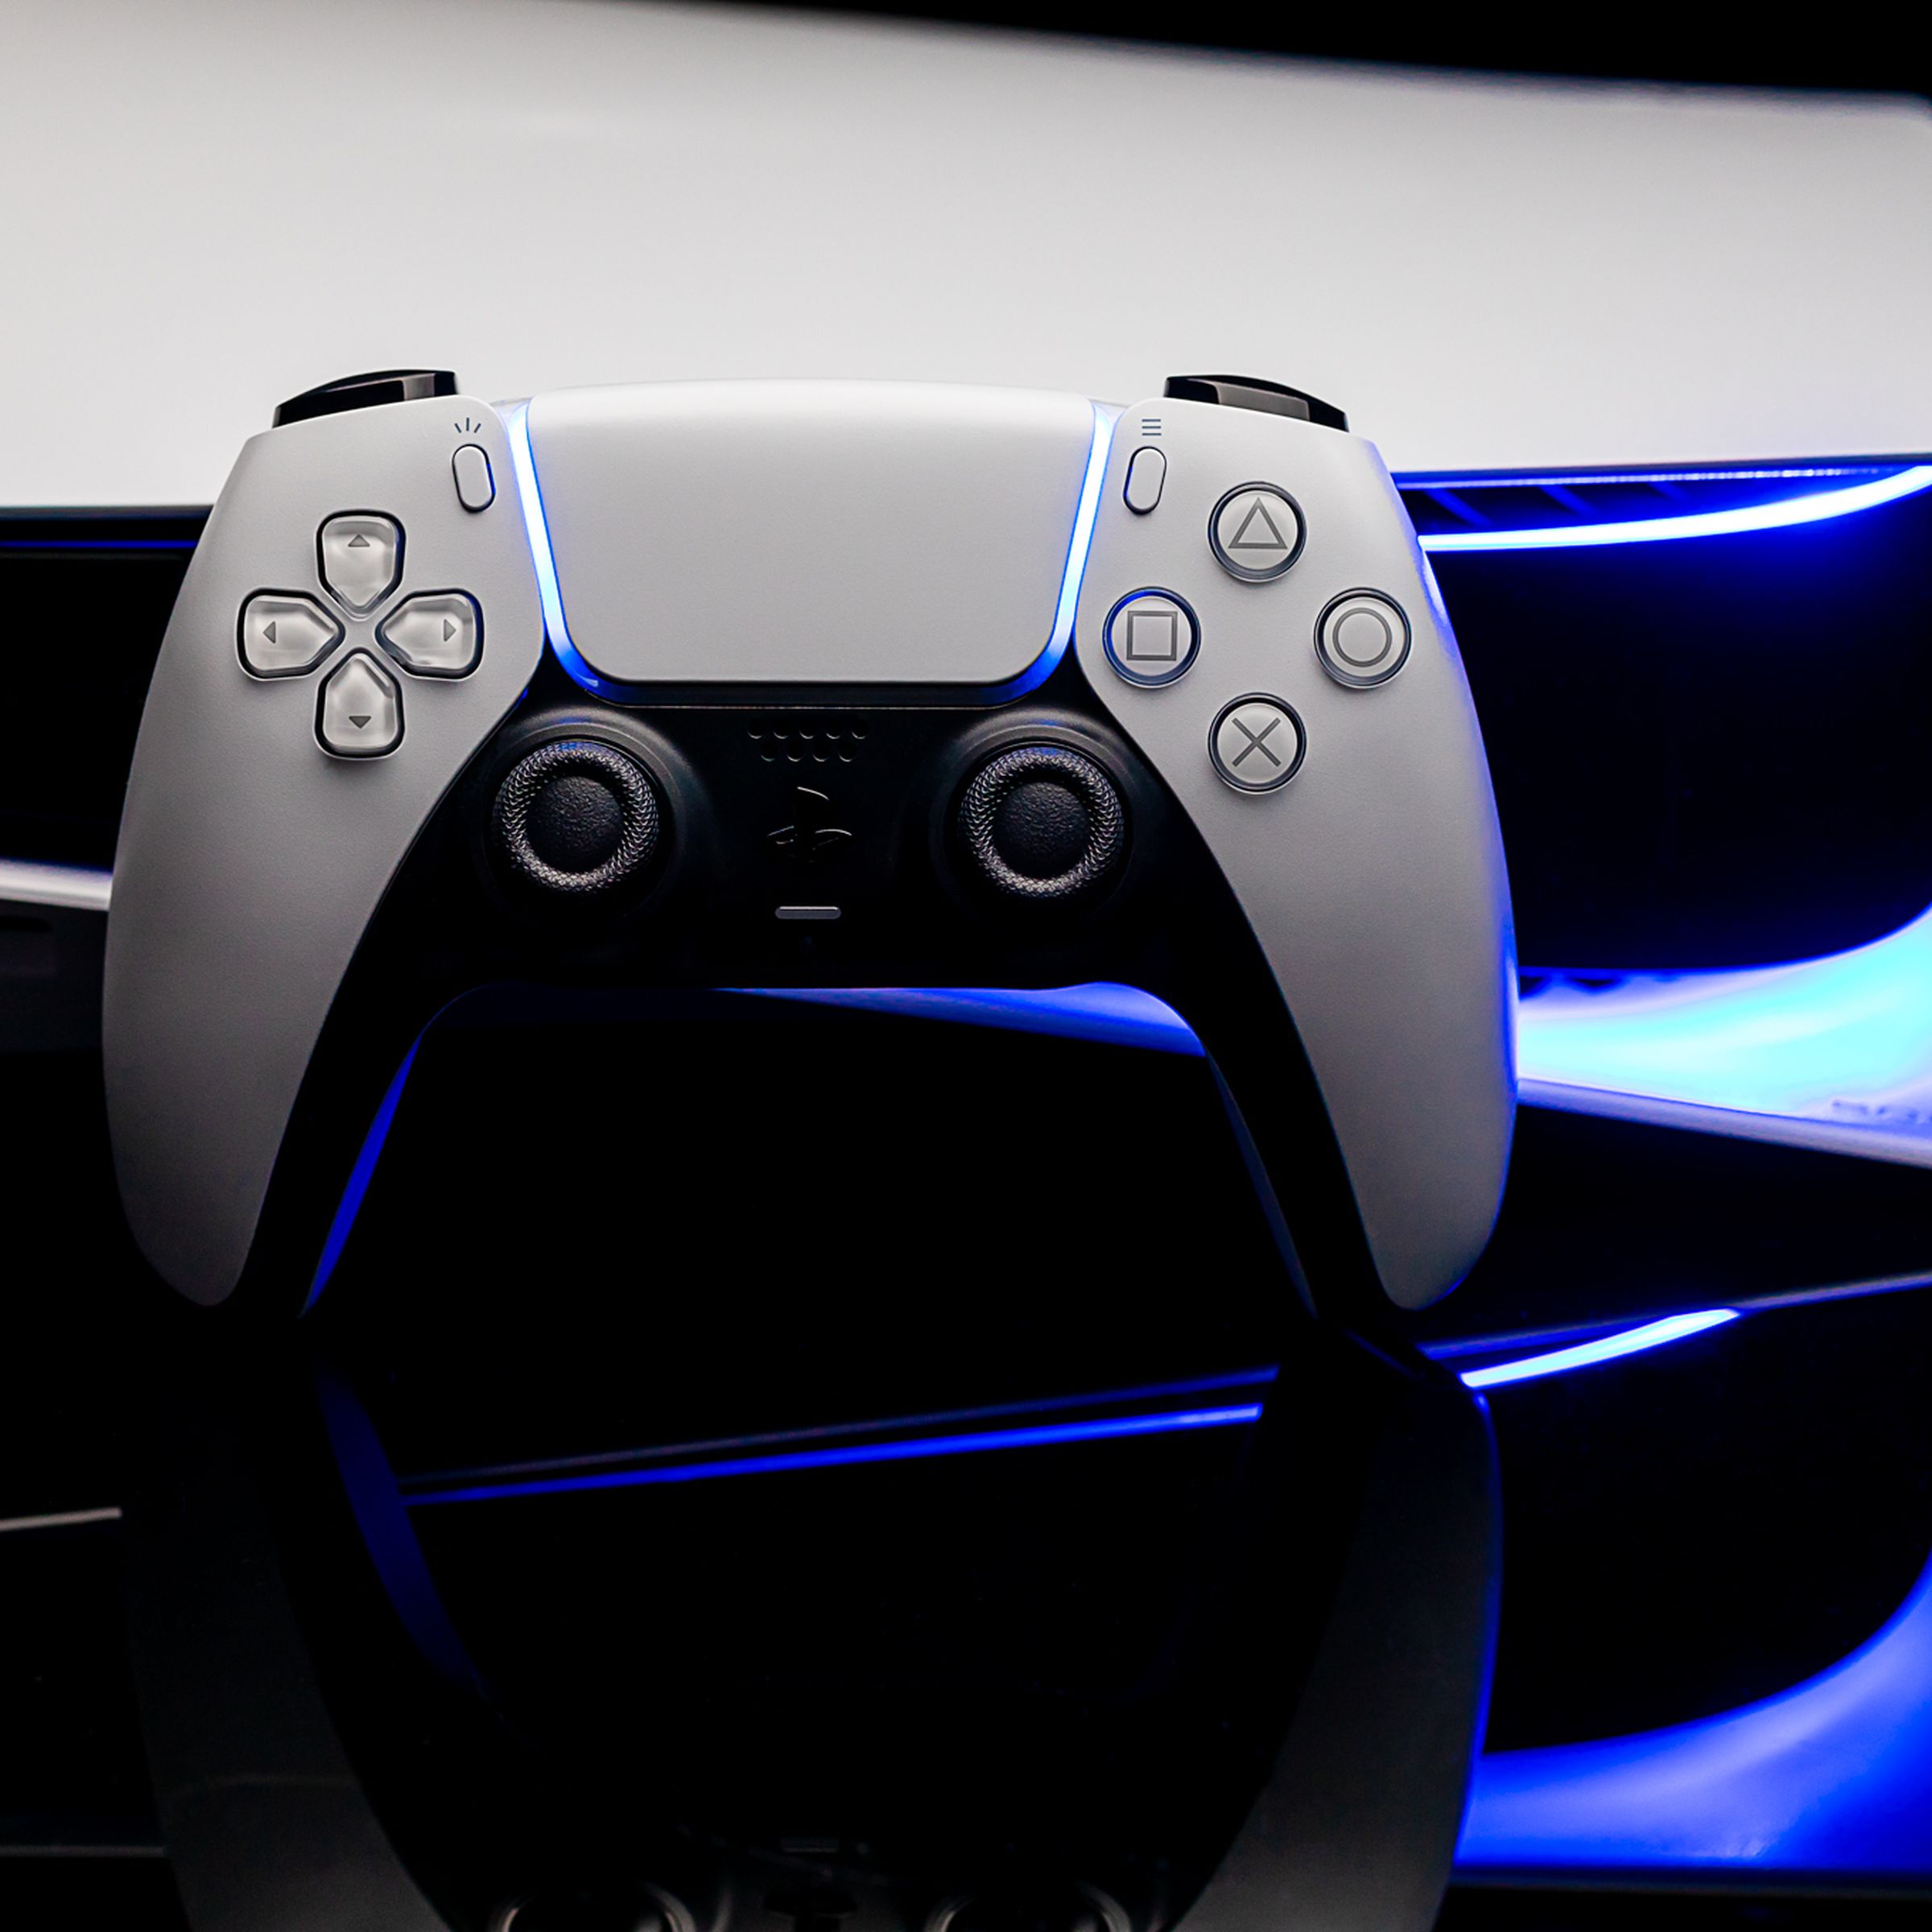 A PlayStation 5 DualSense controller rests on a PlayStation 5 console.